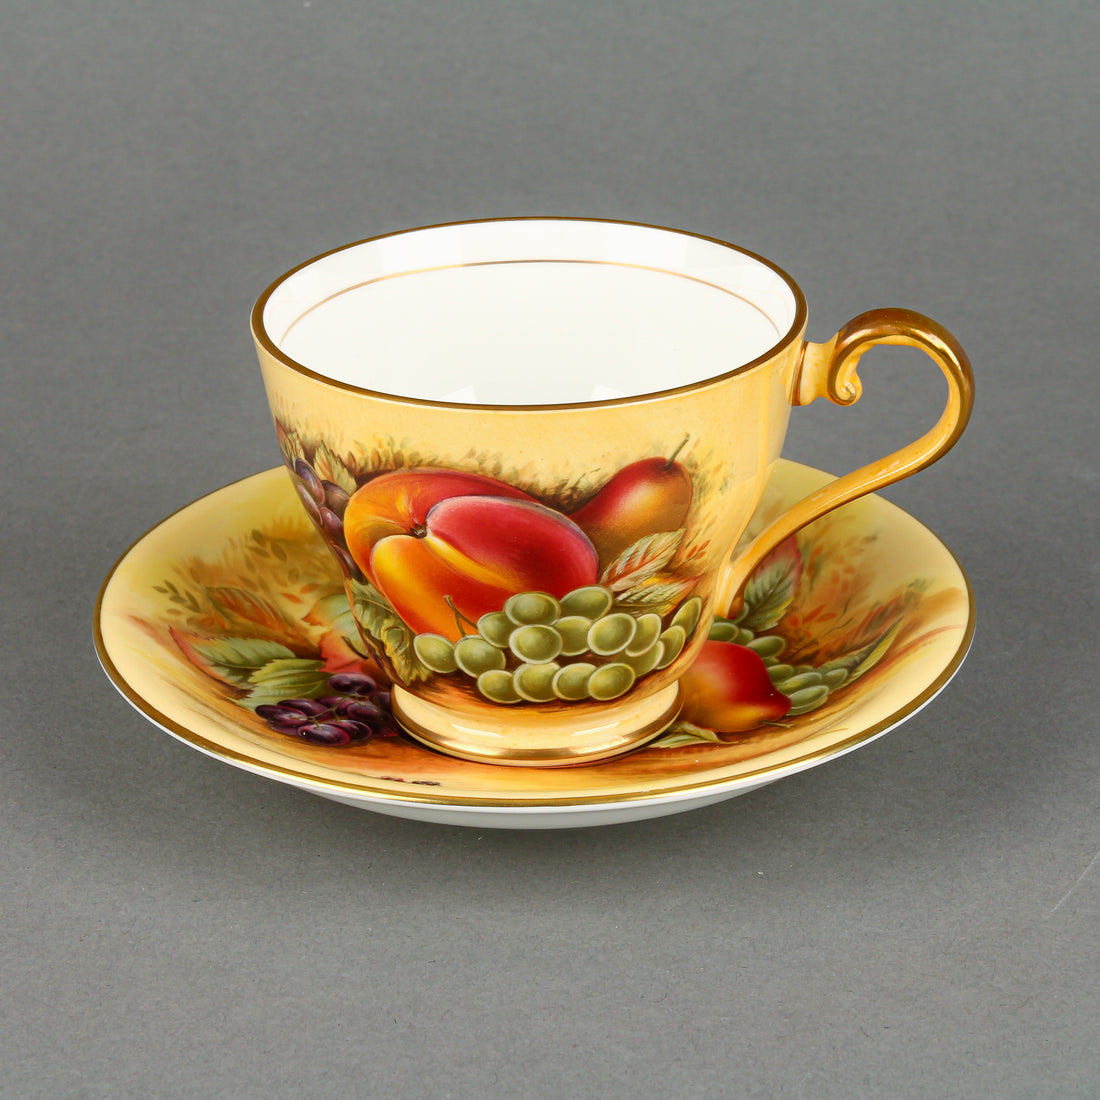 AYNSLEY Orchard Gold Cup & Saucer